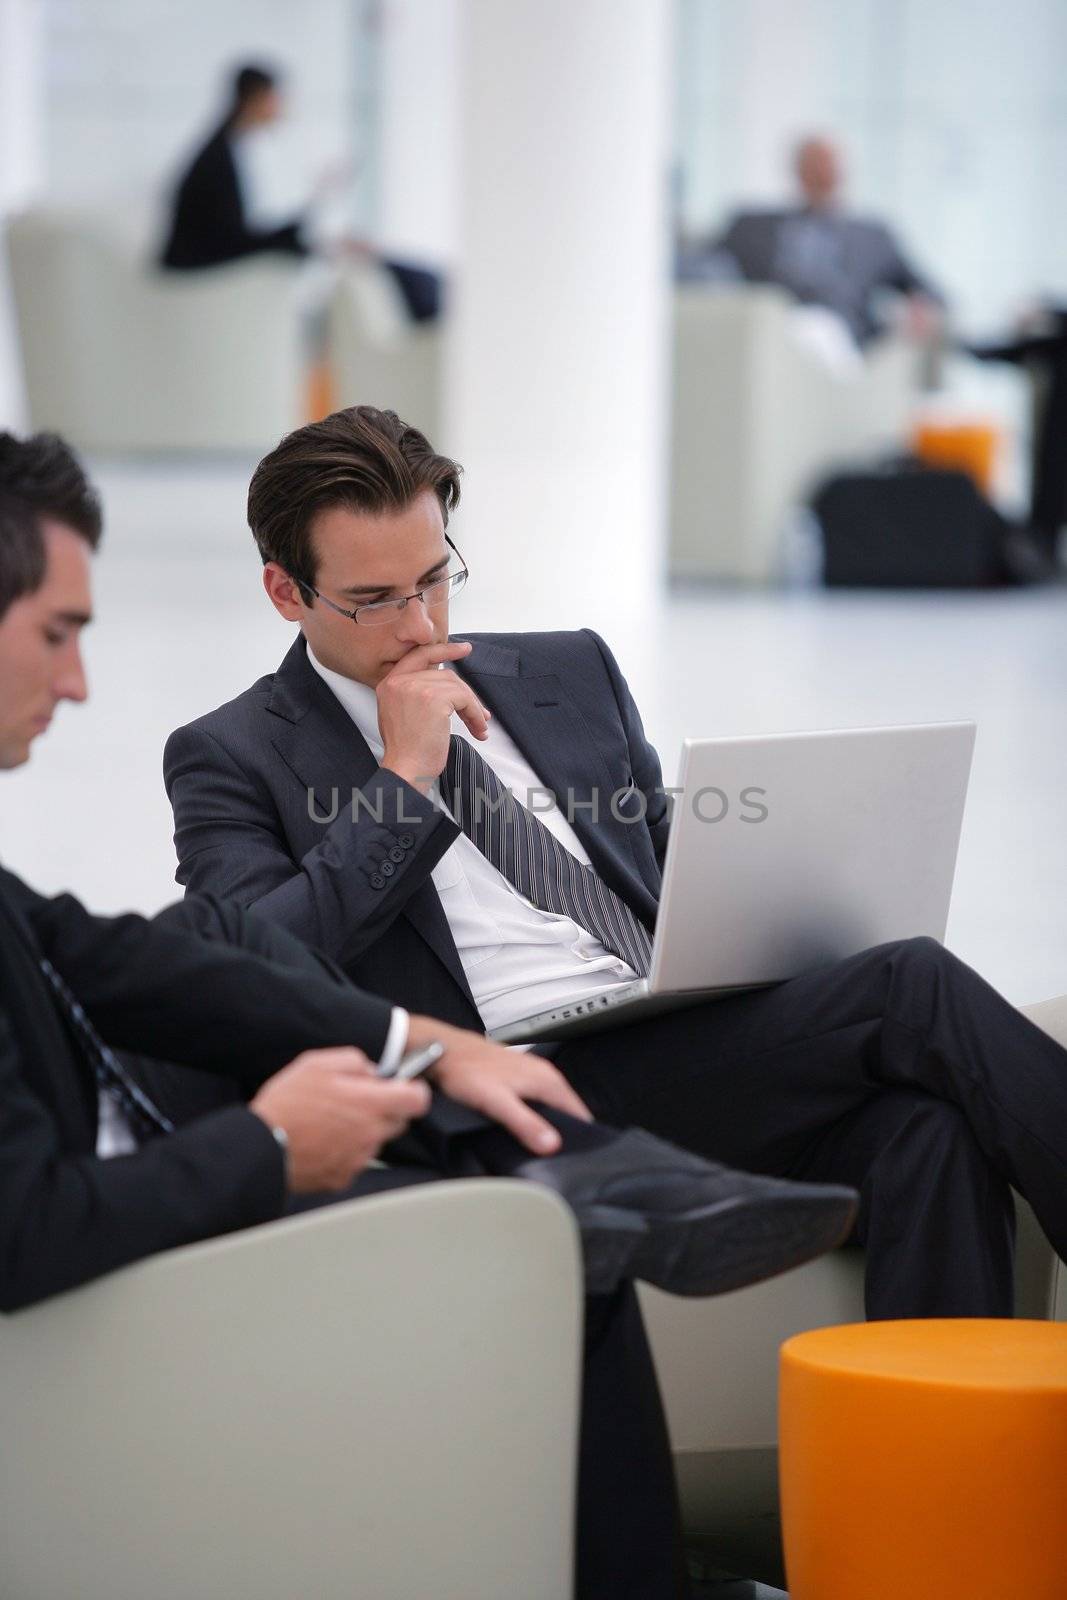 Businessmen waiting in airport lounge by phovoir